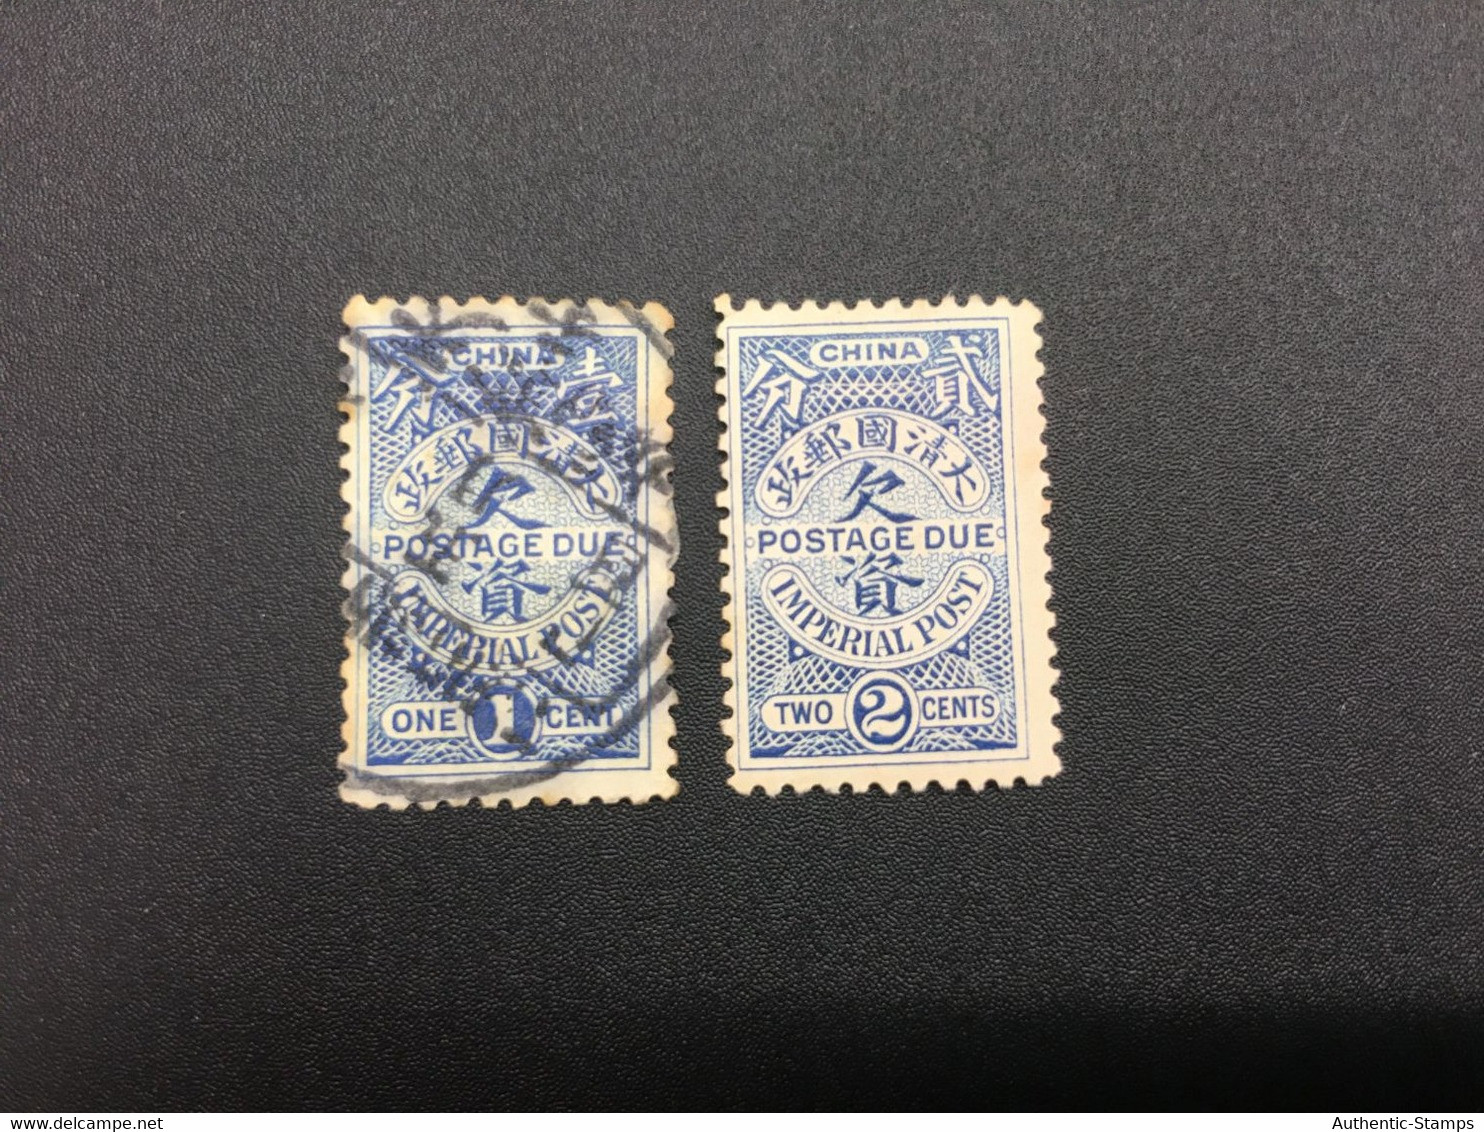 CHINA STAMP, USED, TIMBRO, STEMPEL,  CINA, CHINE, LIST 7291 - Used Stamps